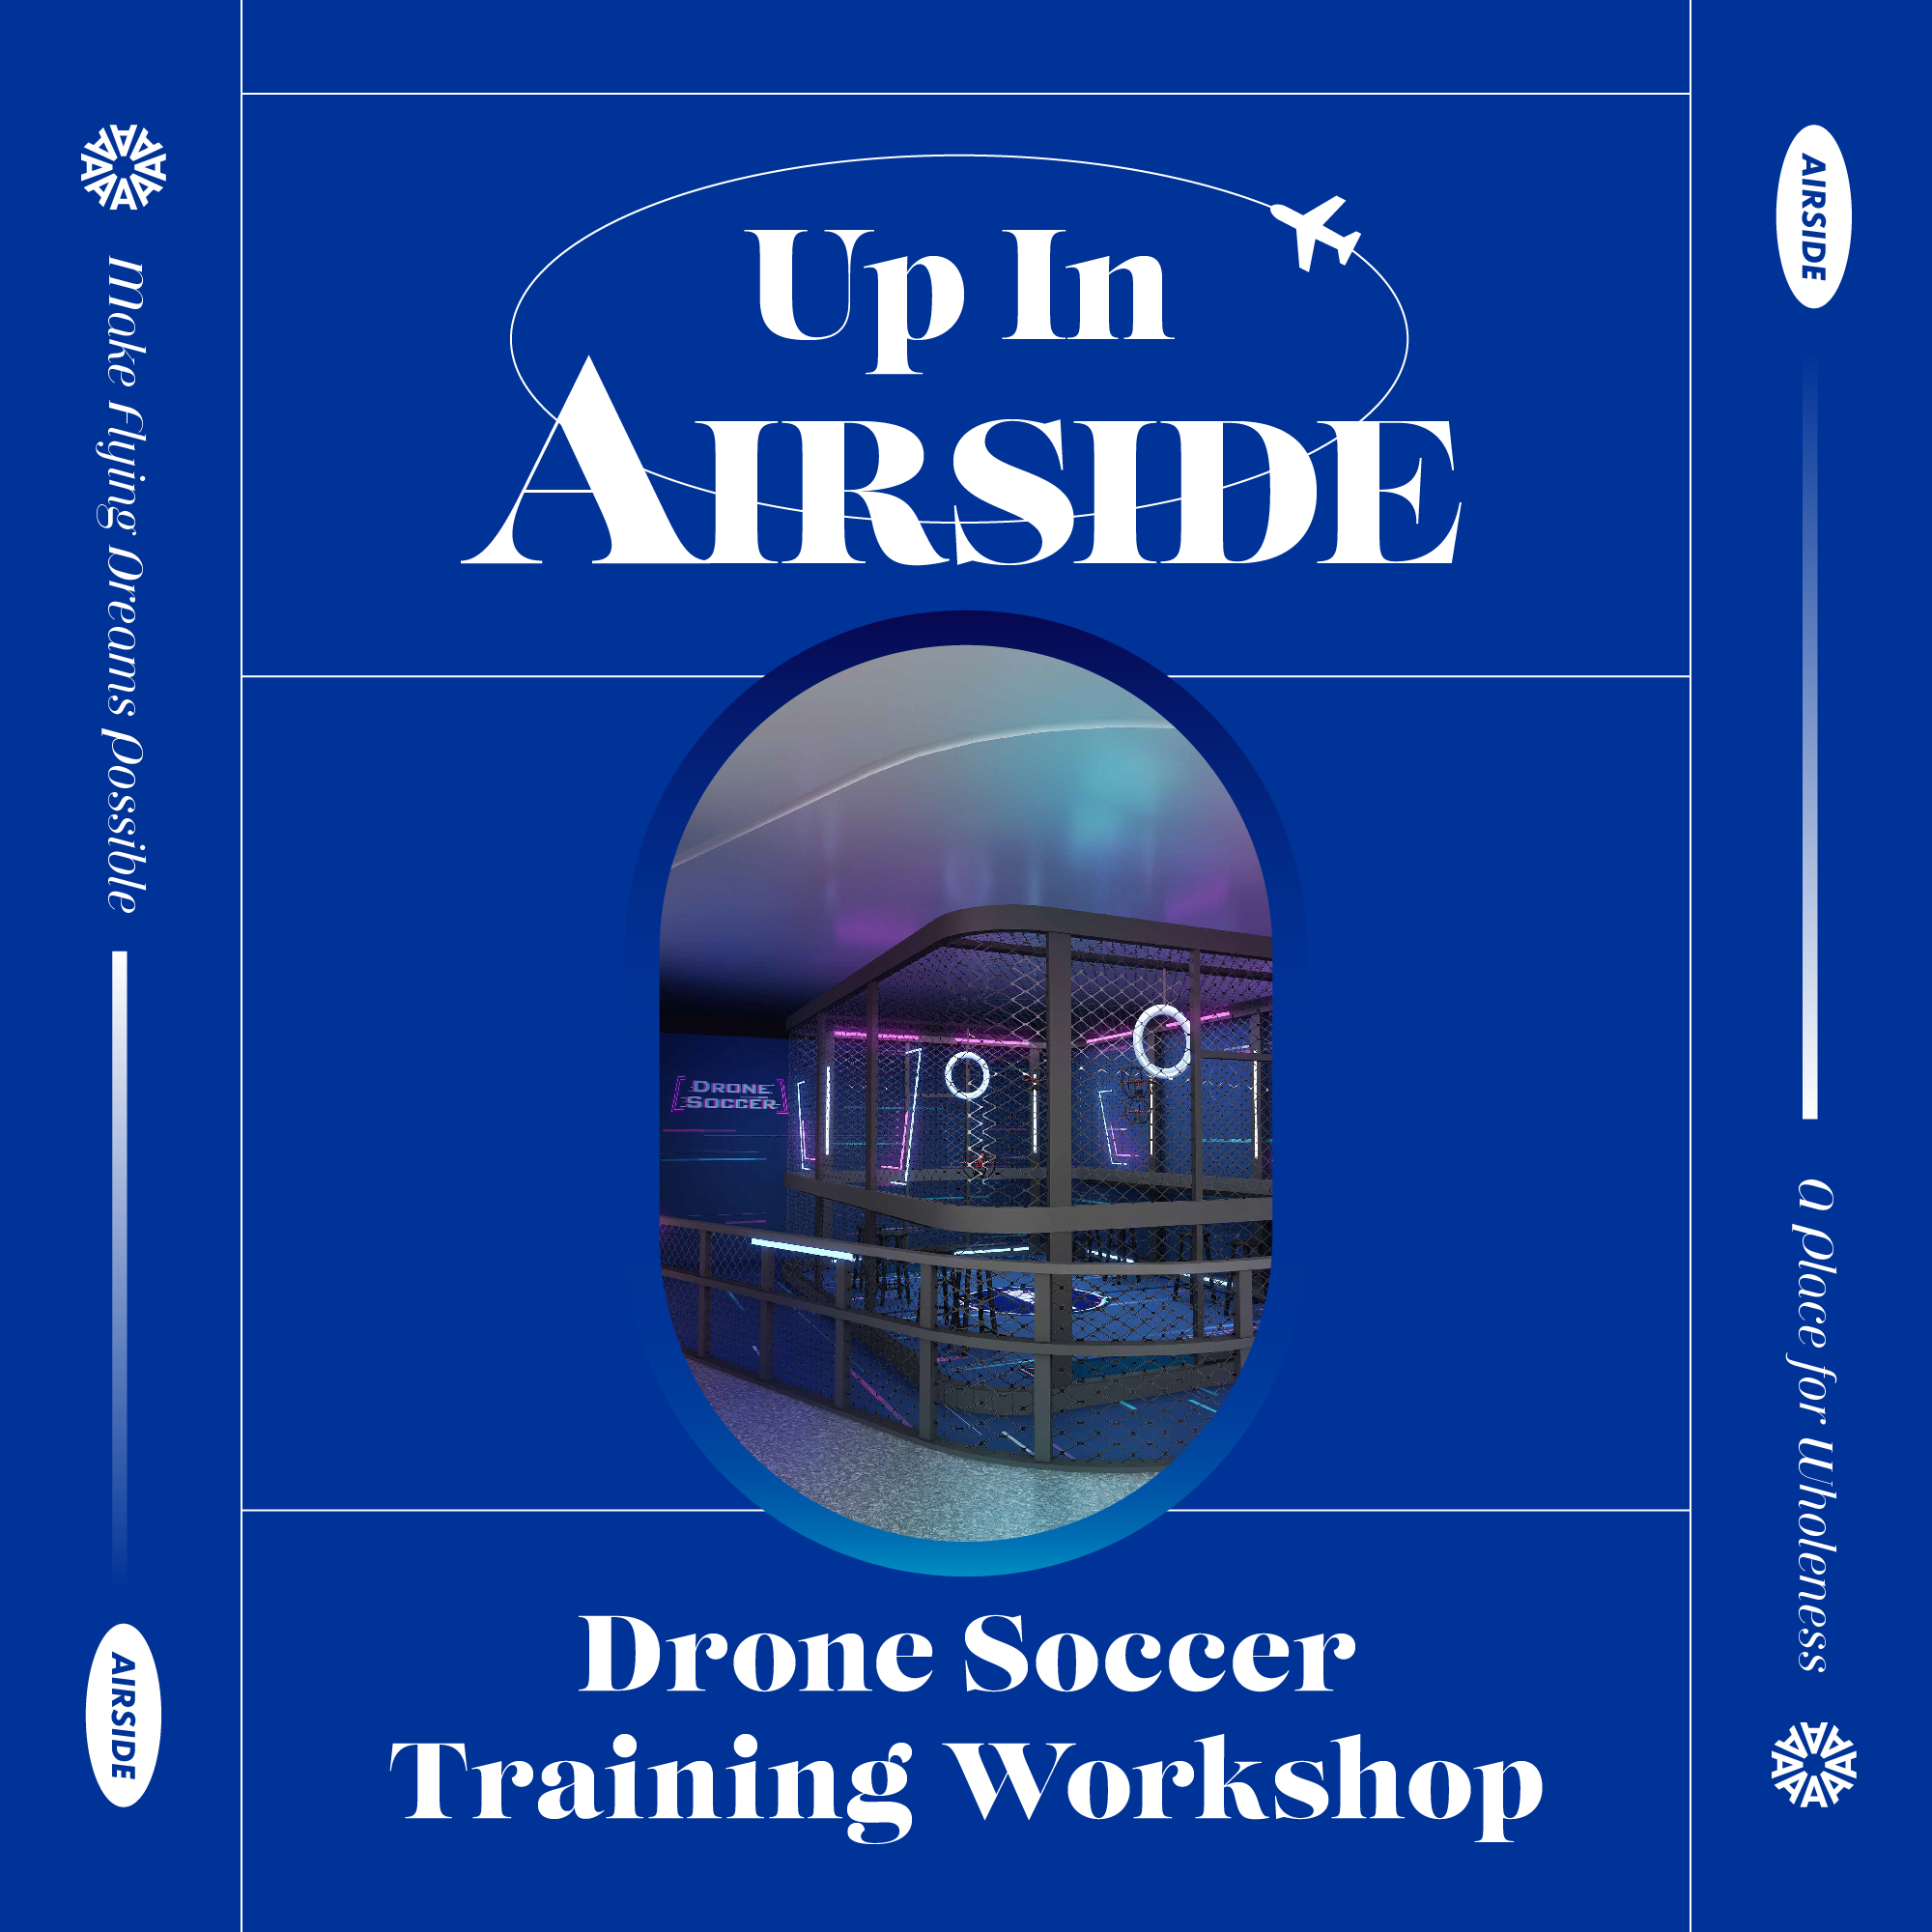 Up In AIRSIDE Drone Soccer Training Workshop & 1-hour Flight Experience